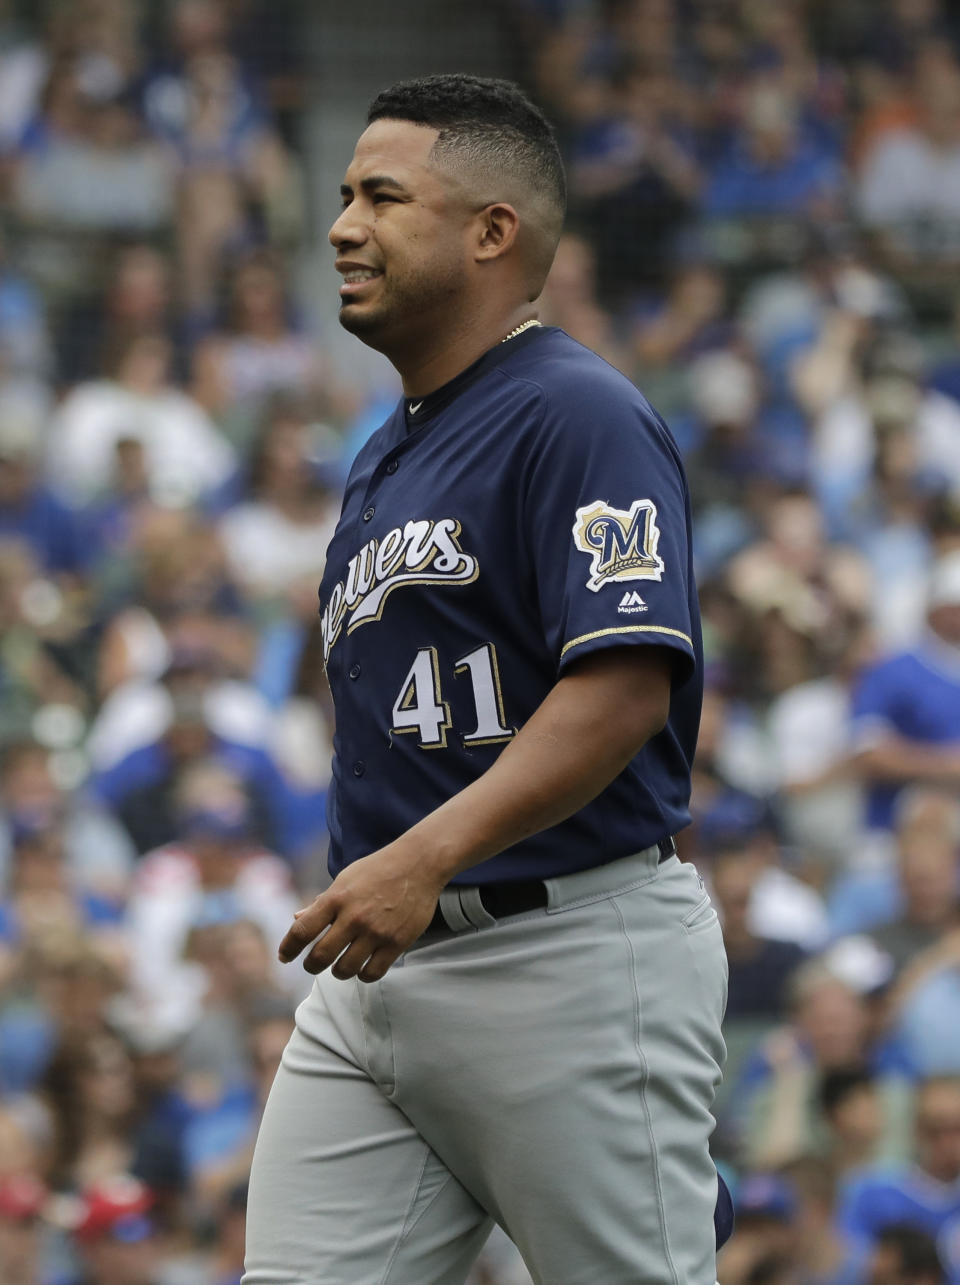 Milwaukee Brewers starting pitcher Junior Guerra reacts as he walks to the dugout after the first inning of a baseball game against the Chicago Cubs, Wednesday, Aug. 15, 2018, in Chicago. (AP Photo/Nam Y. Huh)